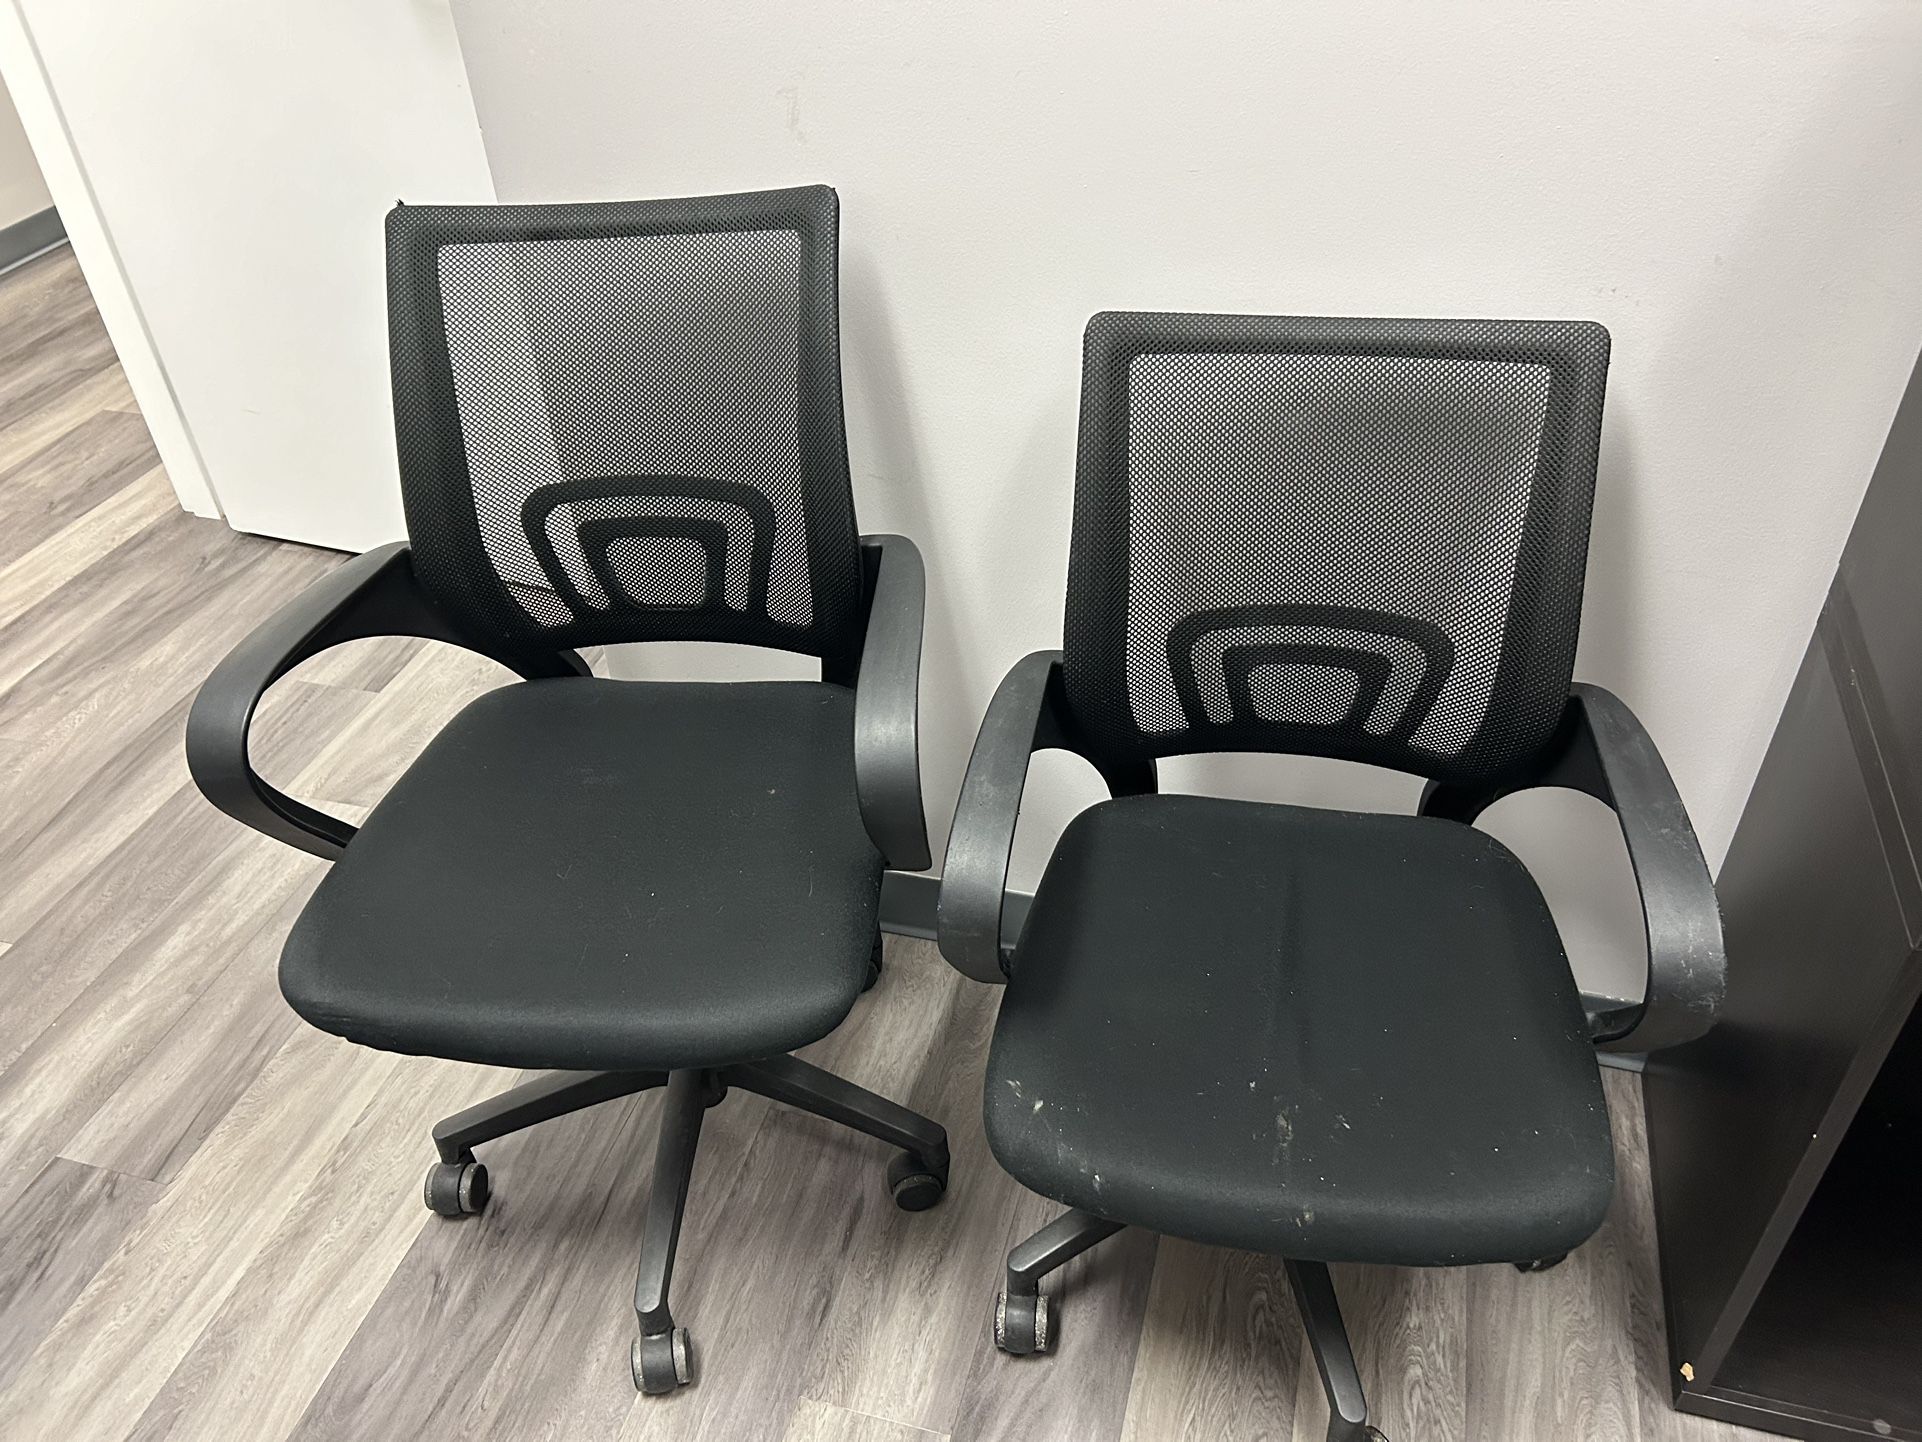 2 Black Rolling Office Desk Chairs Adjustable 